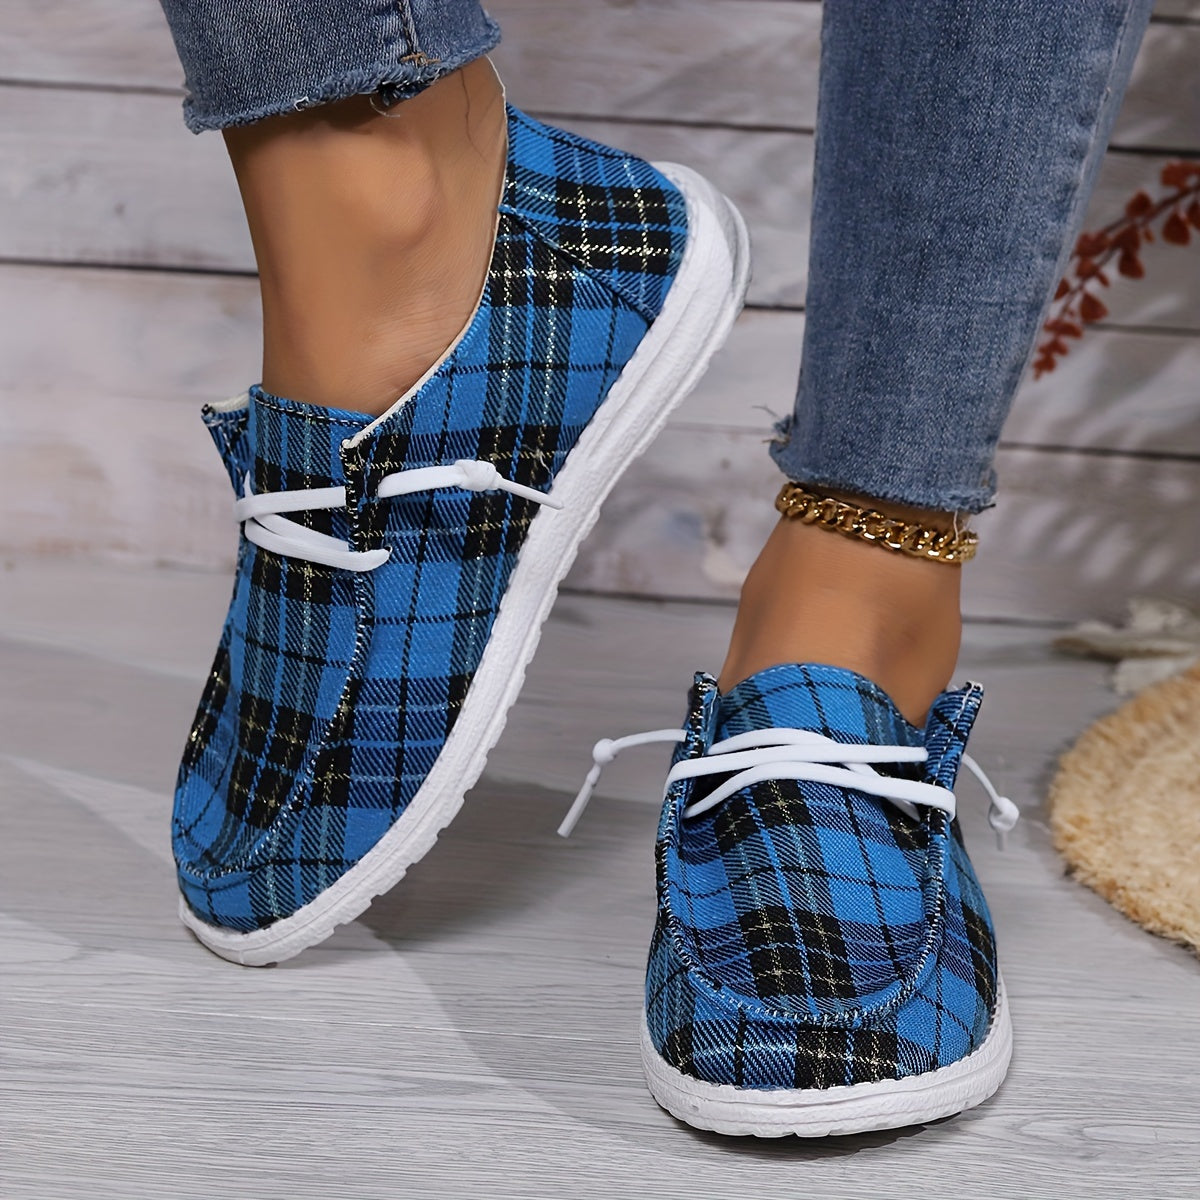 Women's Santa Claus Print Canvas Shoes, Christmas Low Top Slip On Loafers, Casual Flat Round Toe Sneakers